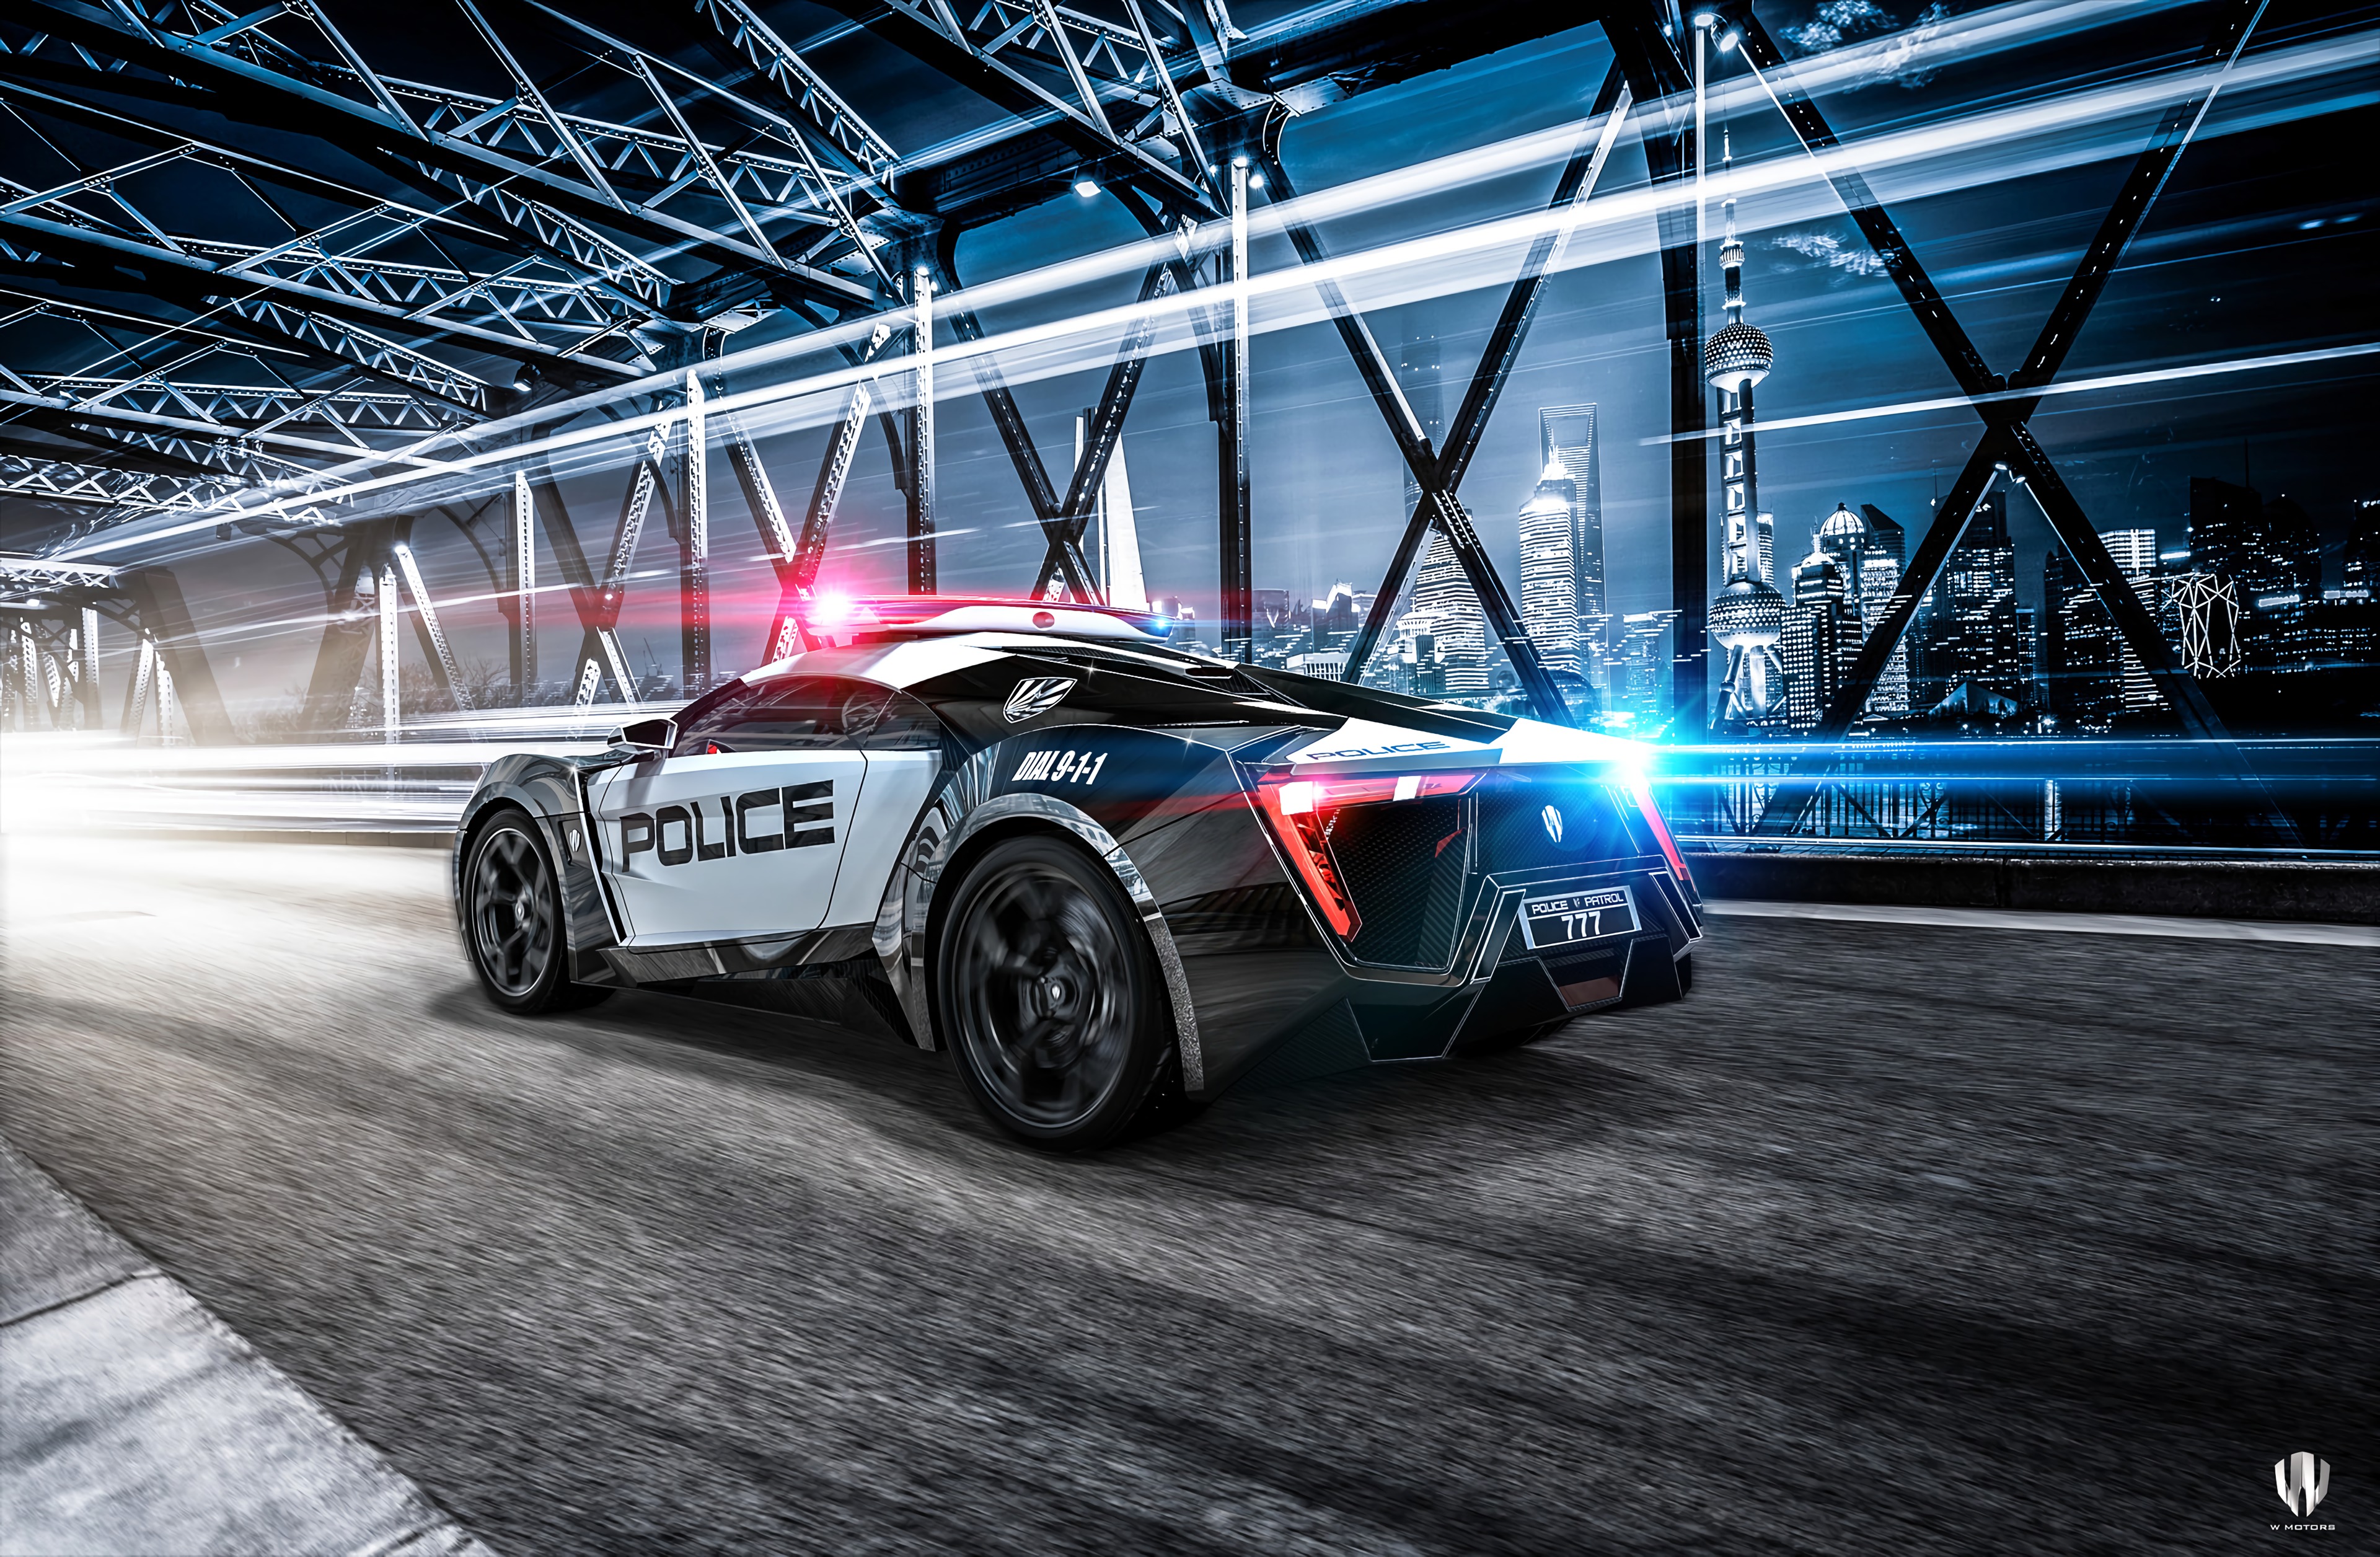 police, lights, sports, cars, car, sports car, supercar wallpaper for mobile